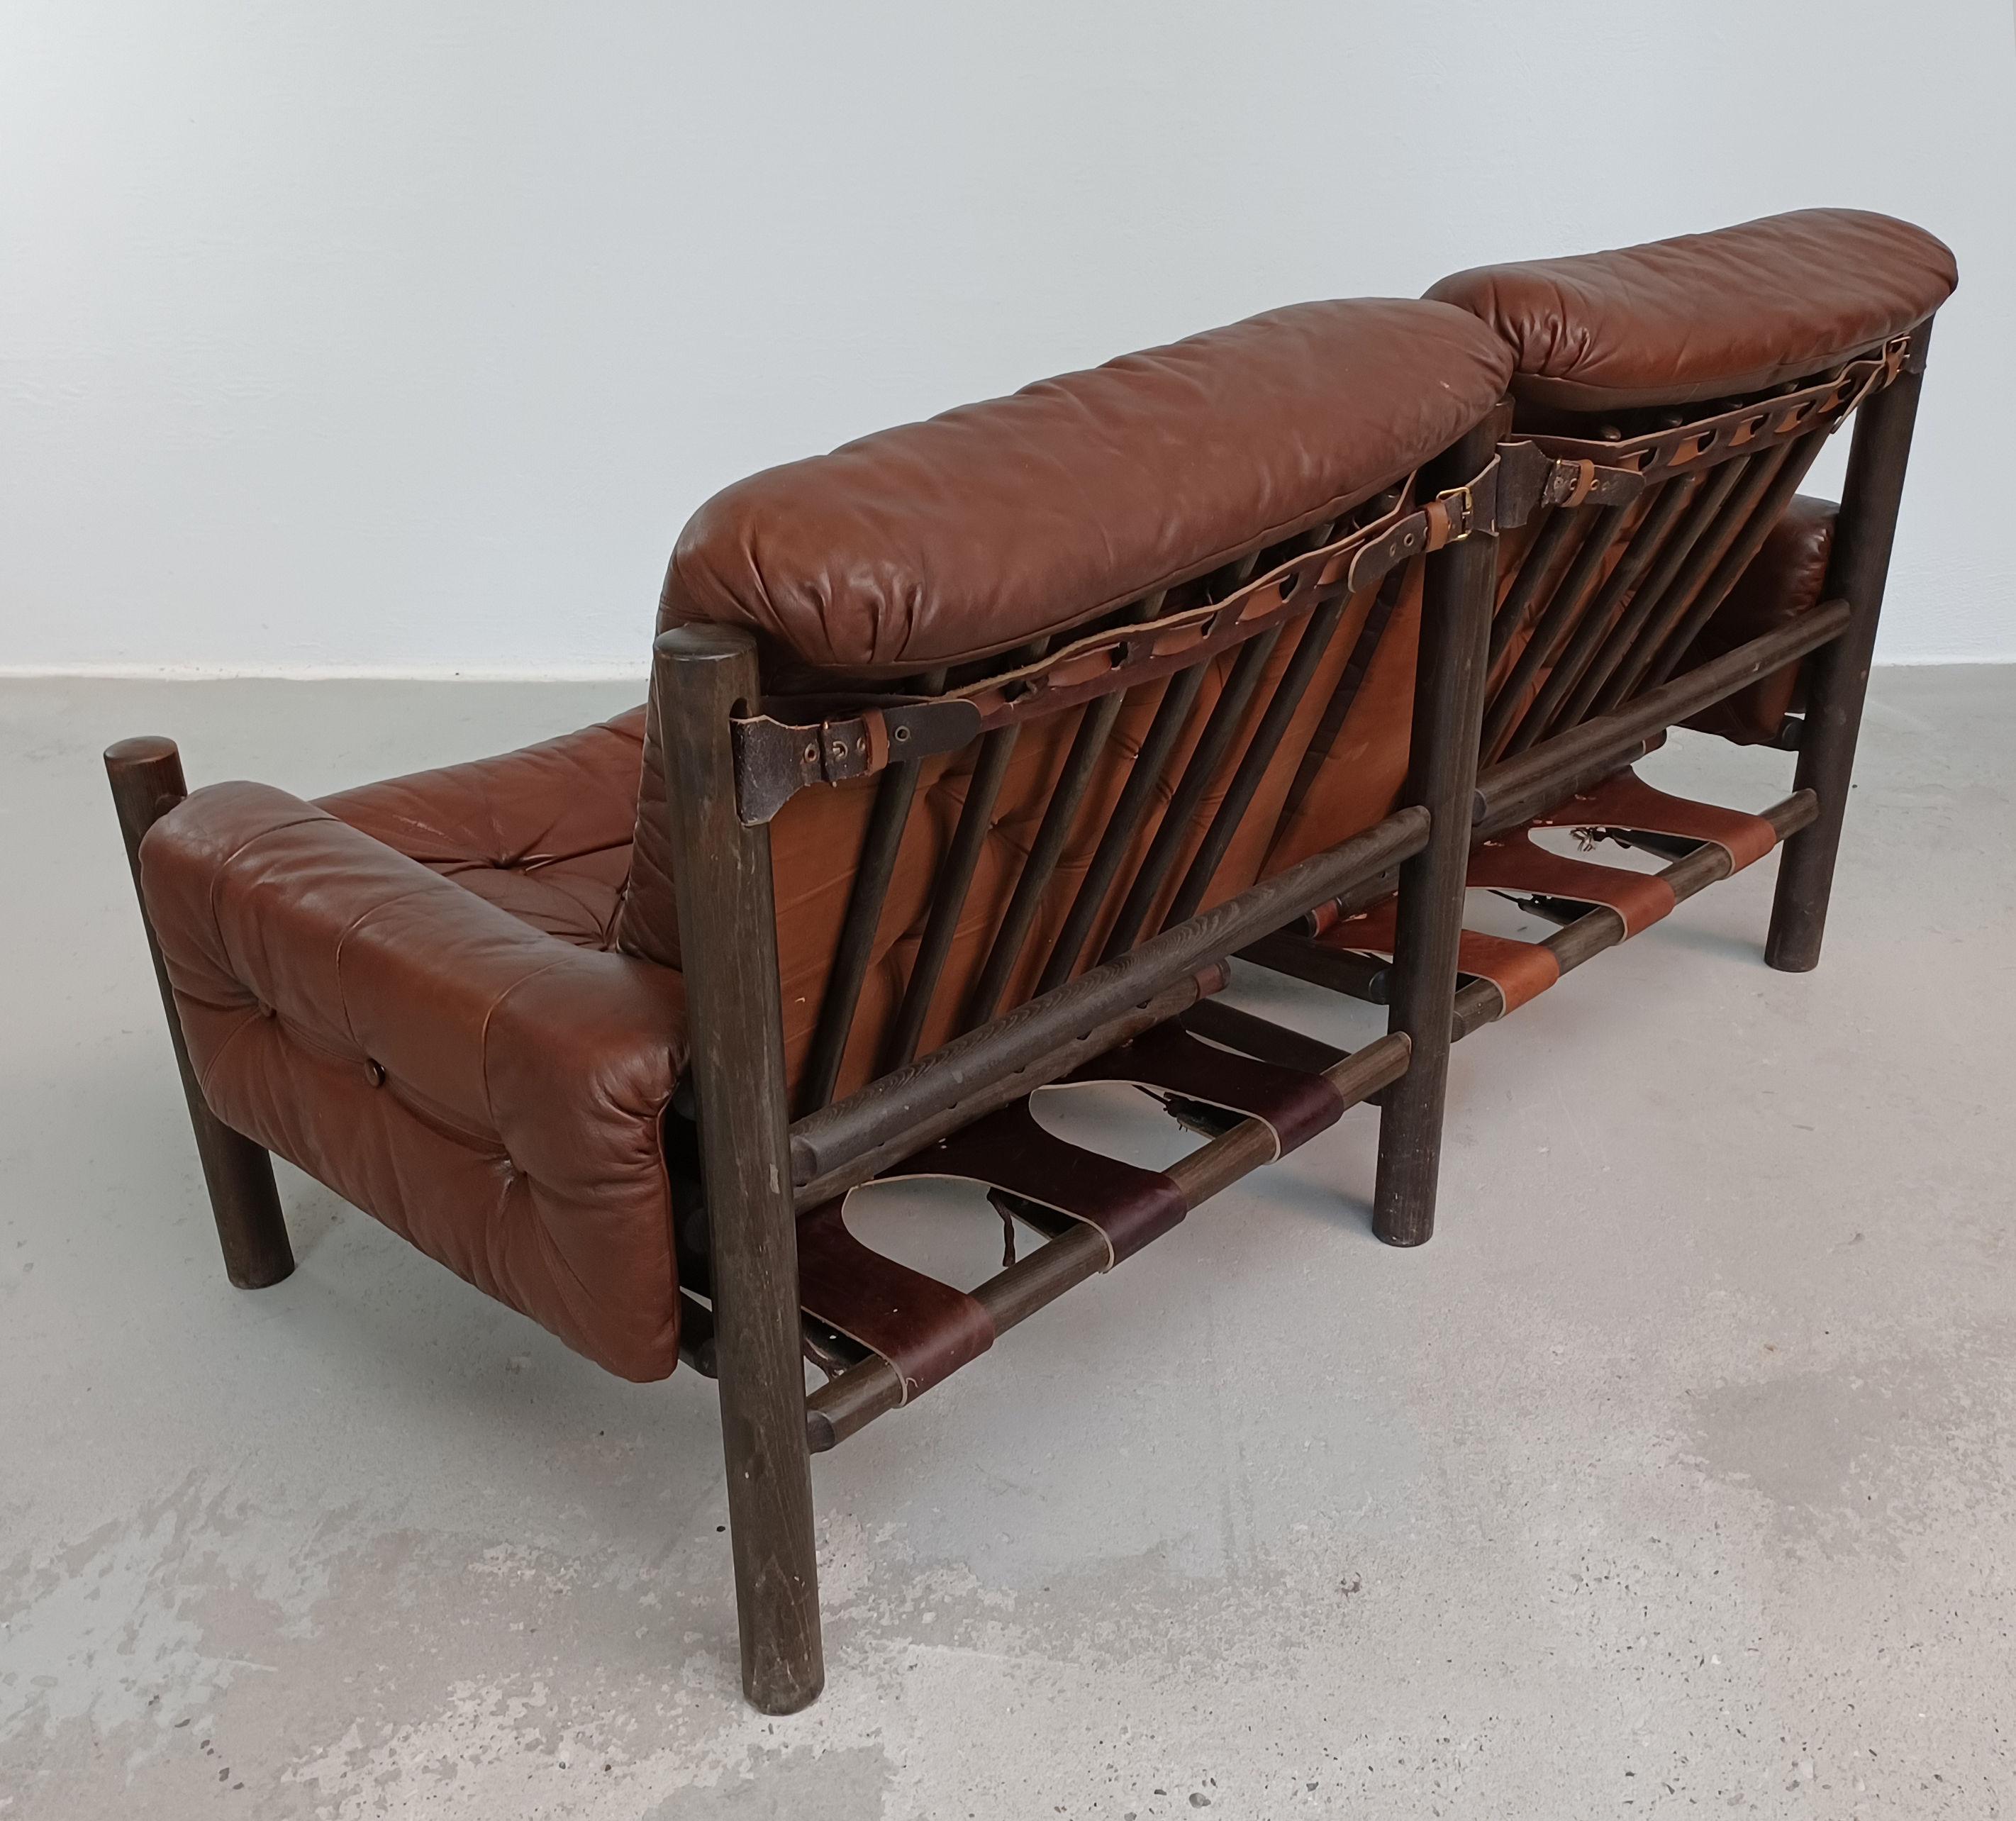 1960's Norwegian Bruksbo Safari Sofa in Wood and Leather In Good Condition For Sale In Knebel, DK